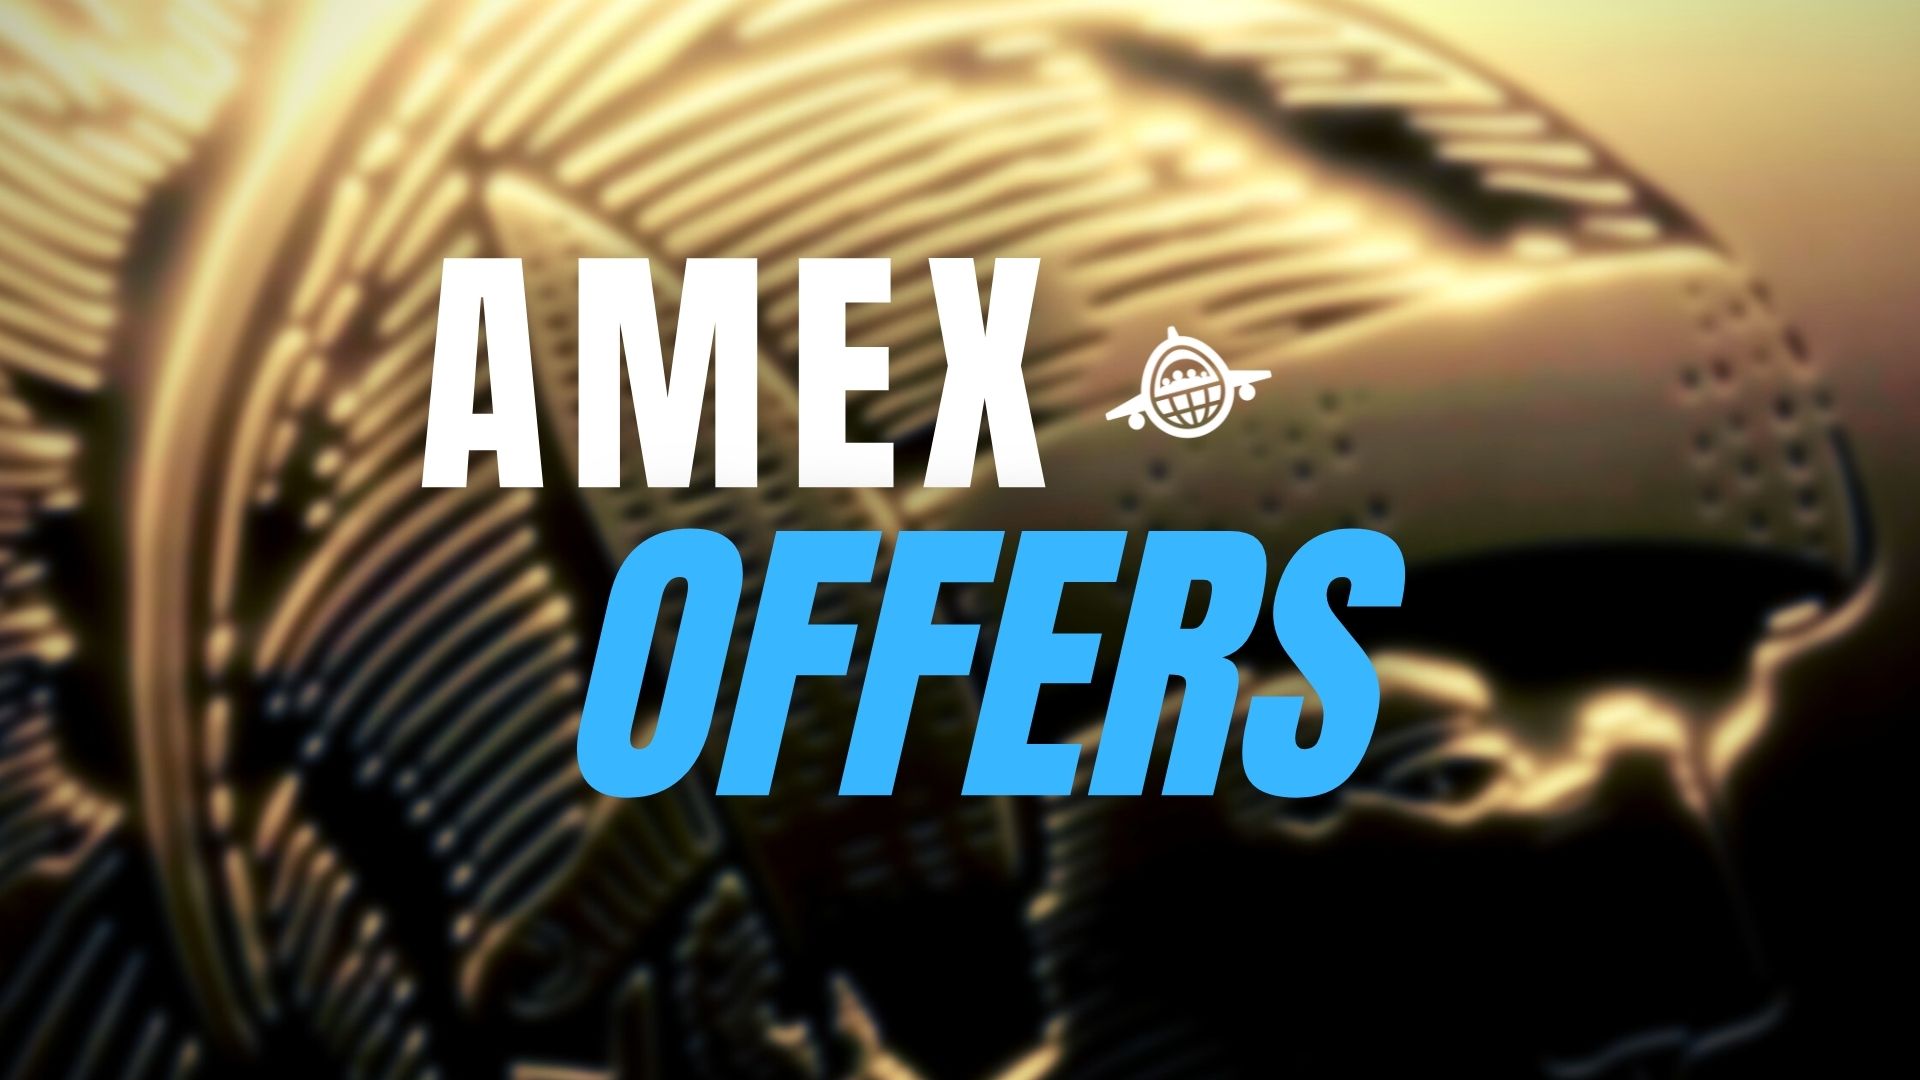 New Amex Offers